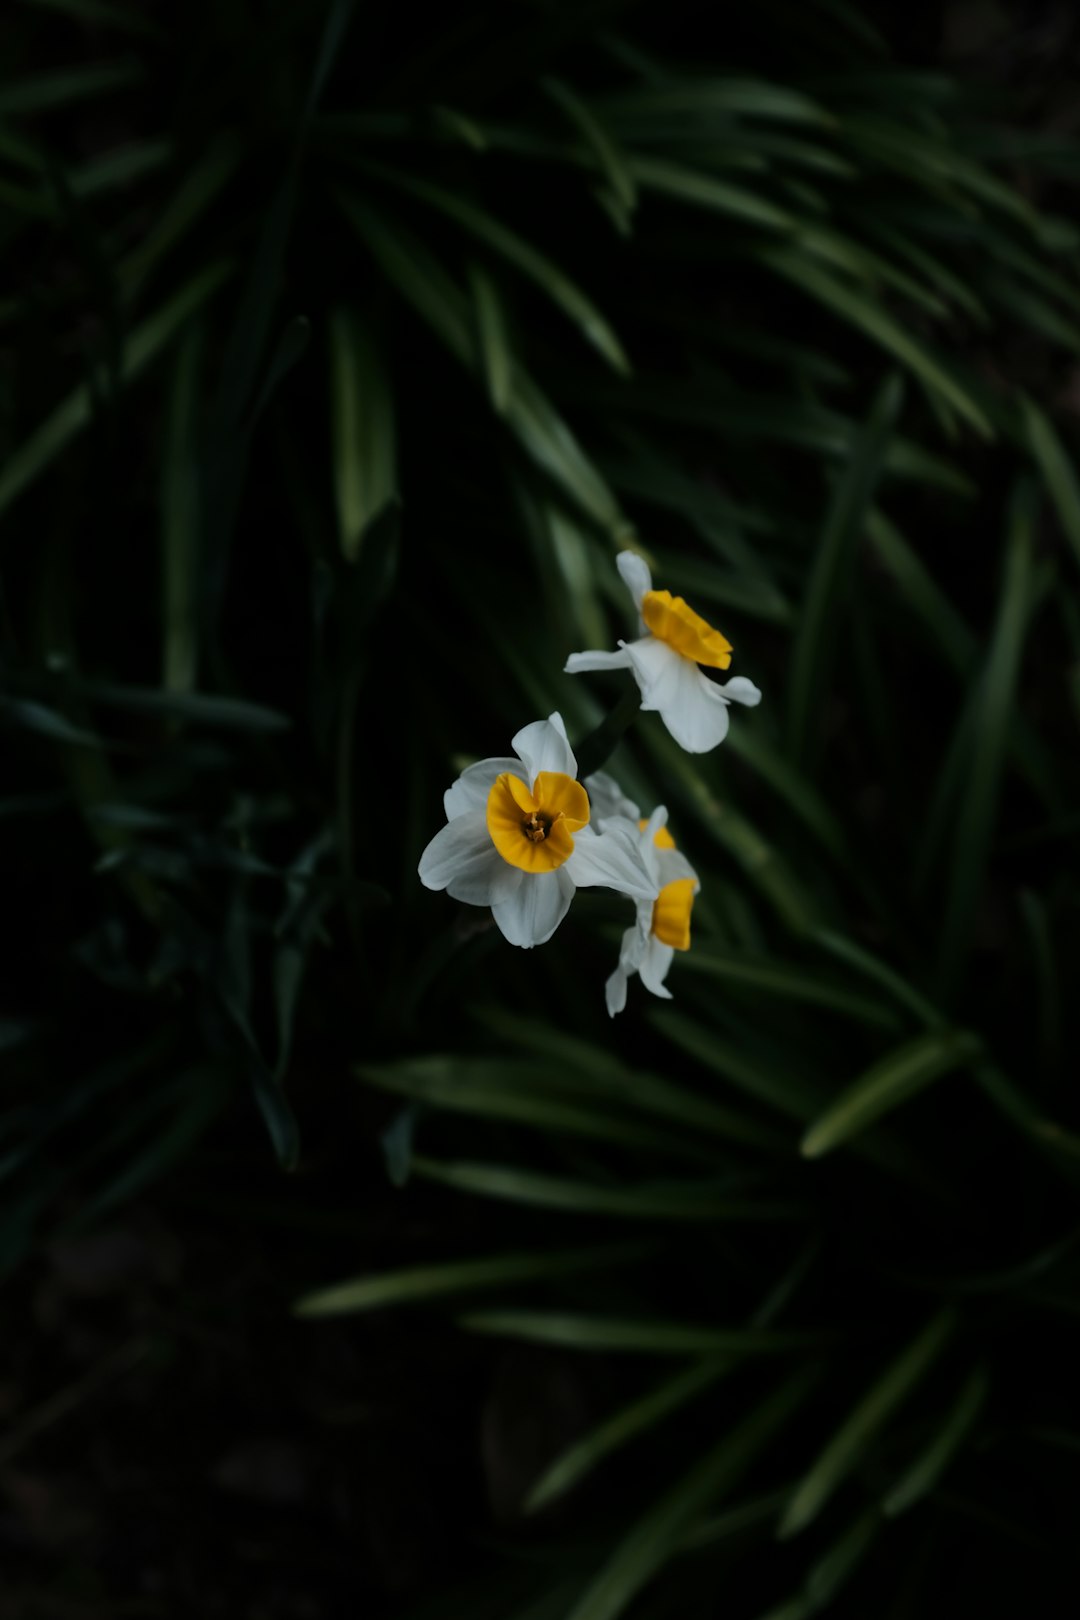 yellow and white flower in bloom